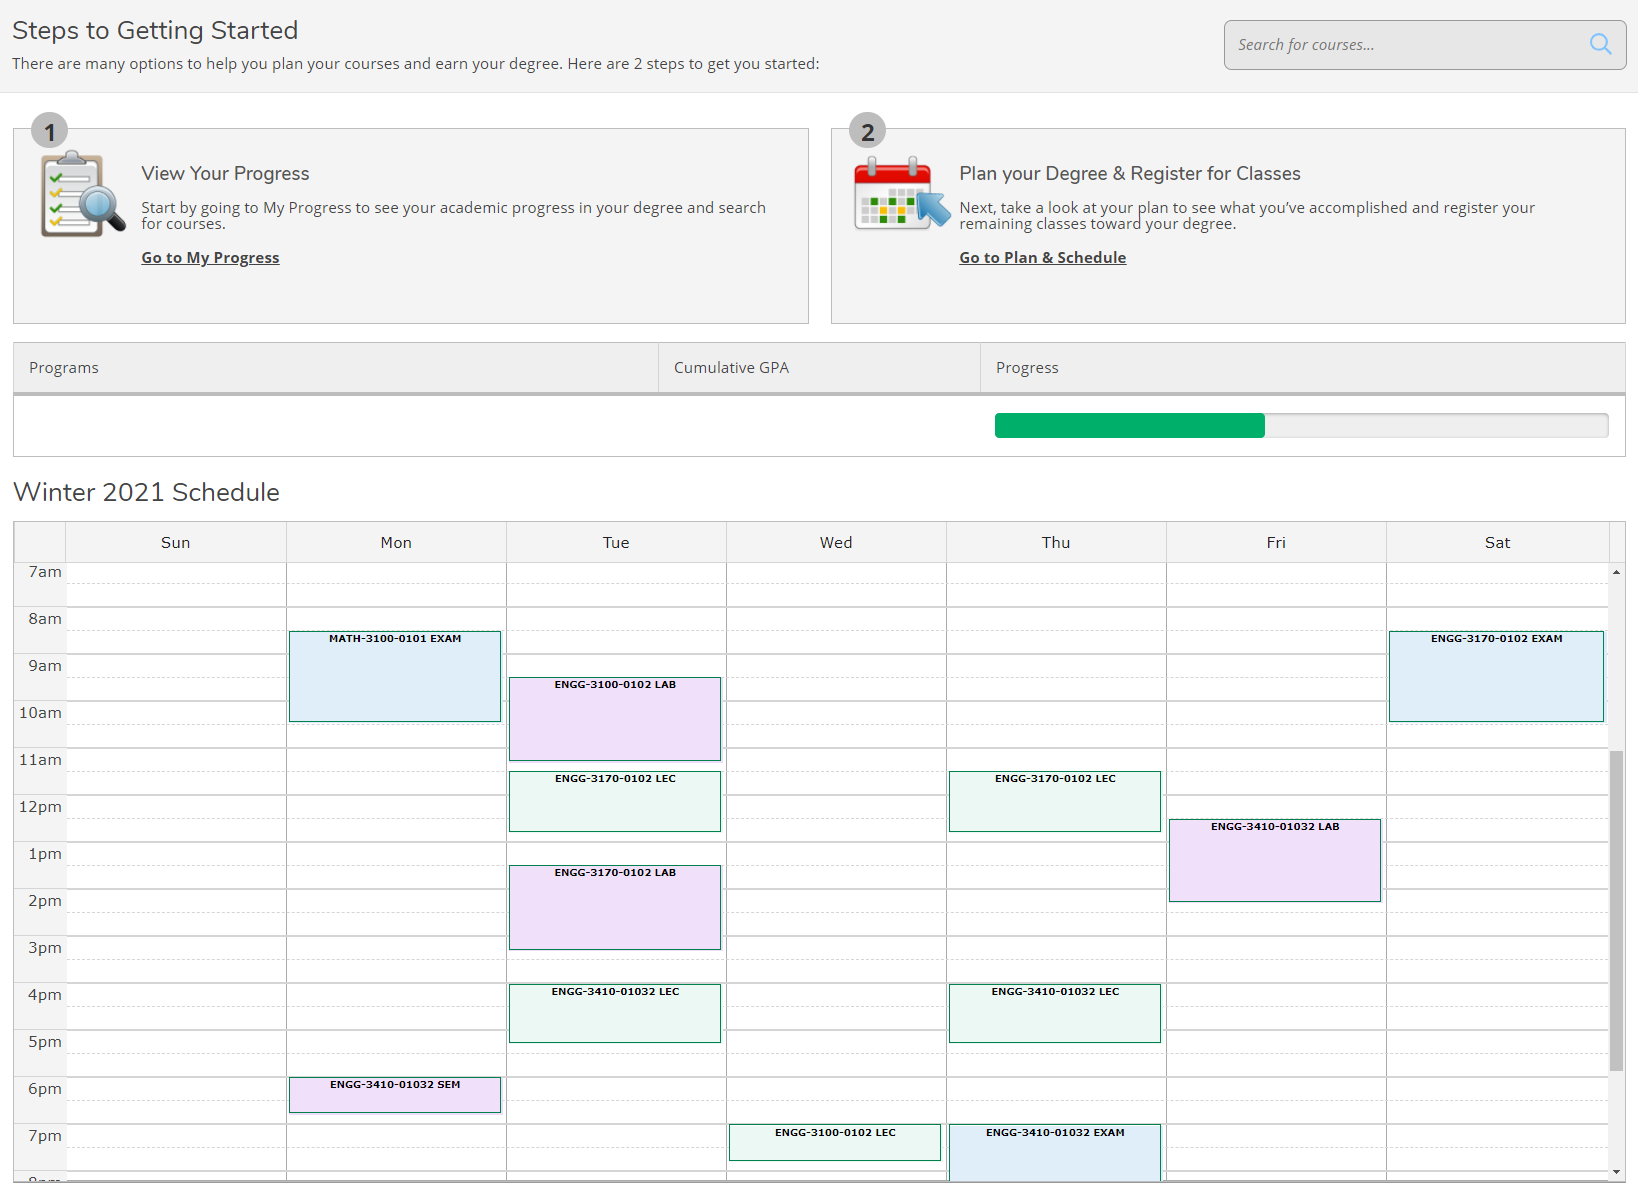 Screenshot of the Student Planning module, showing the two steps involved (View Your Progress and Plan your Degree & Register for Classes), the student's program, GPA and schedule.